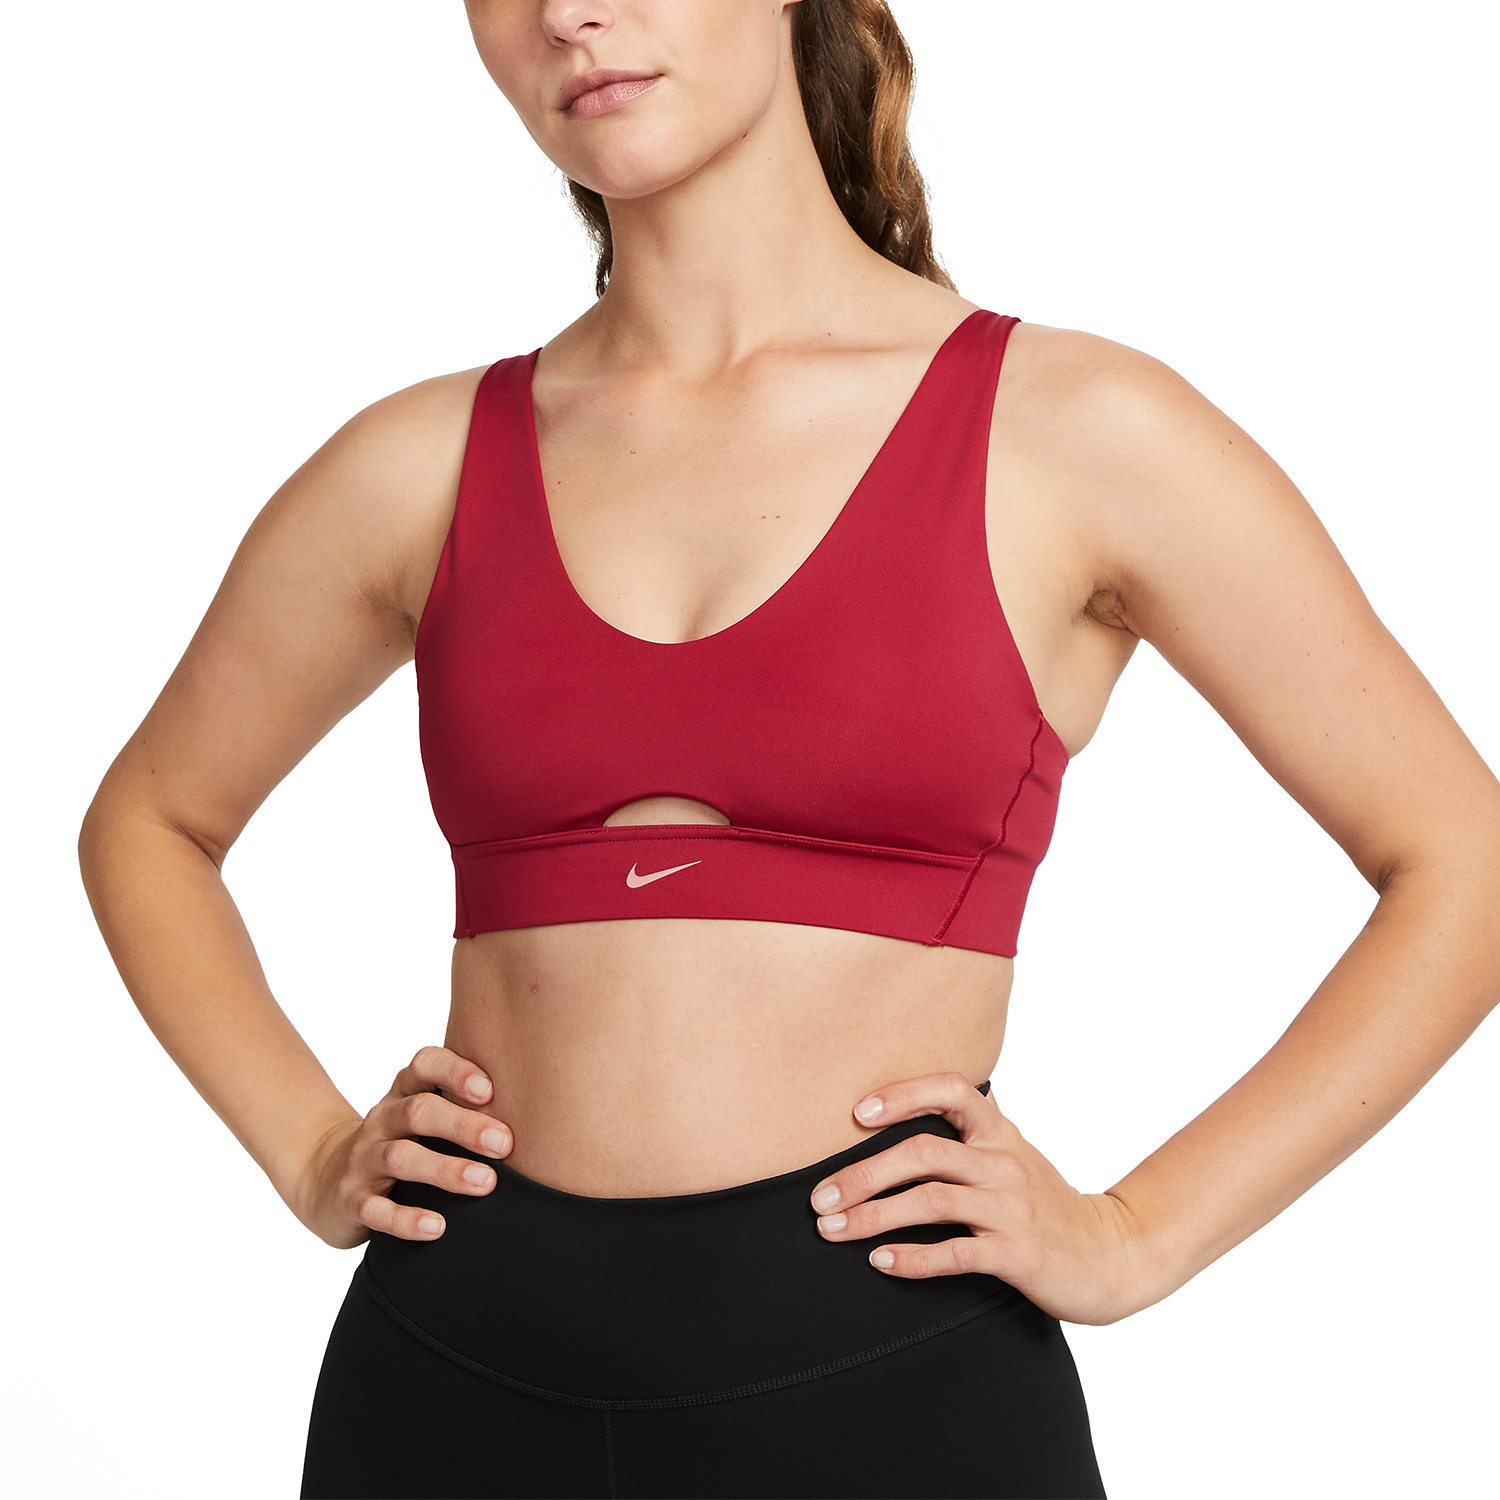 Nike Dri-fit Indy Women's Light-sup - Undershirts And Fitness Tops